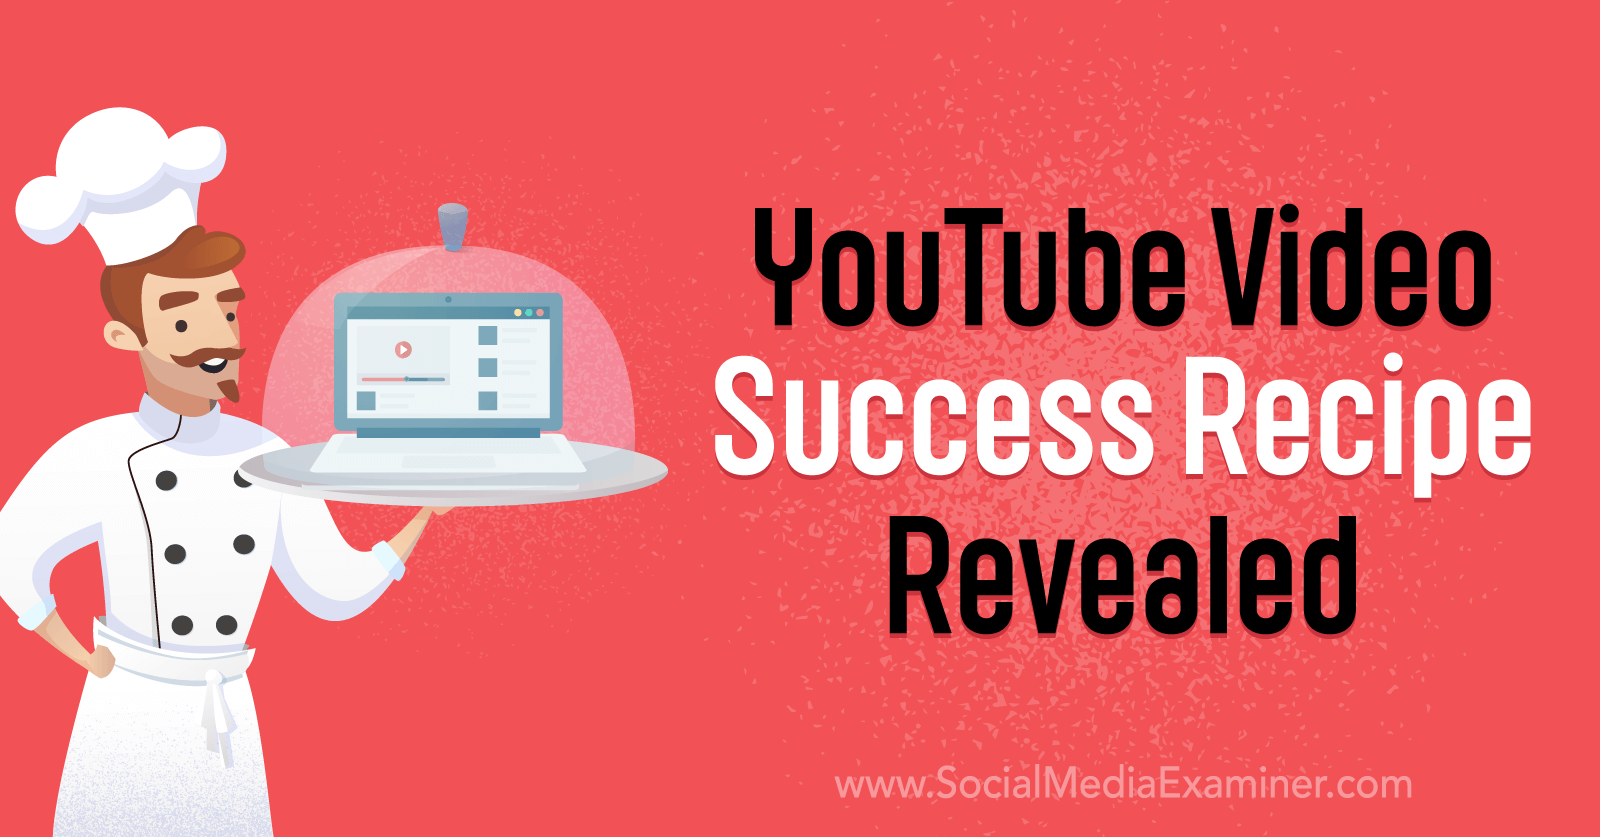 YouTube Video Success Recipe Revealed featuring insights from Sean Cannell on the Social Media Marketing Podcast.